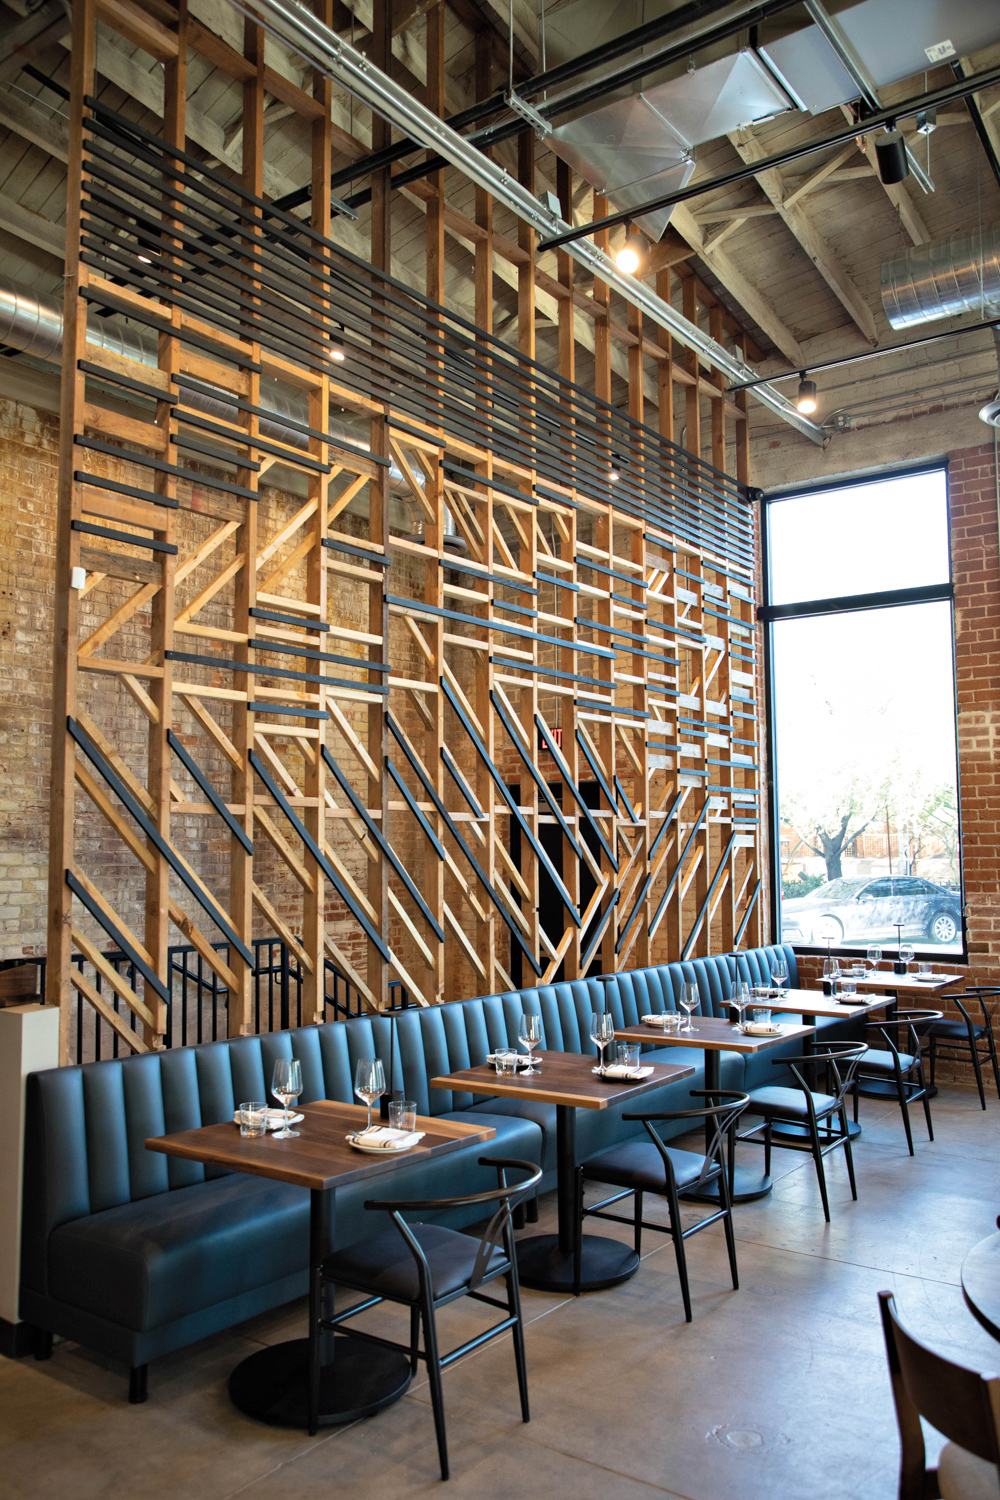 Rows of restaurant tables facing a wall-long leather banquette against an intricate wood-carved wall